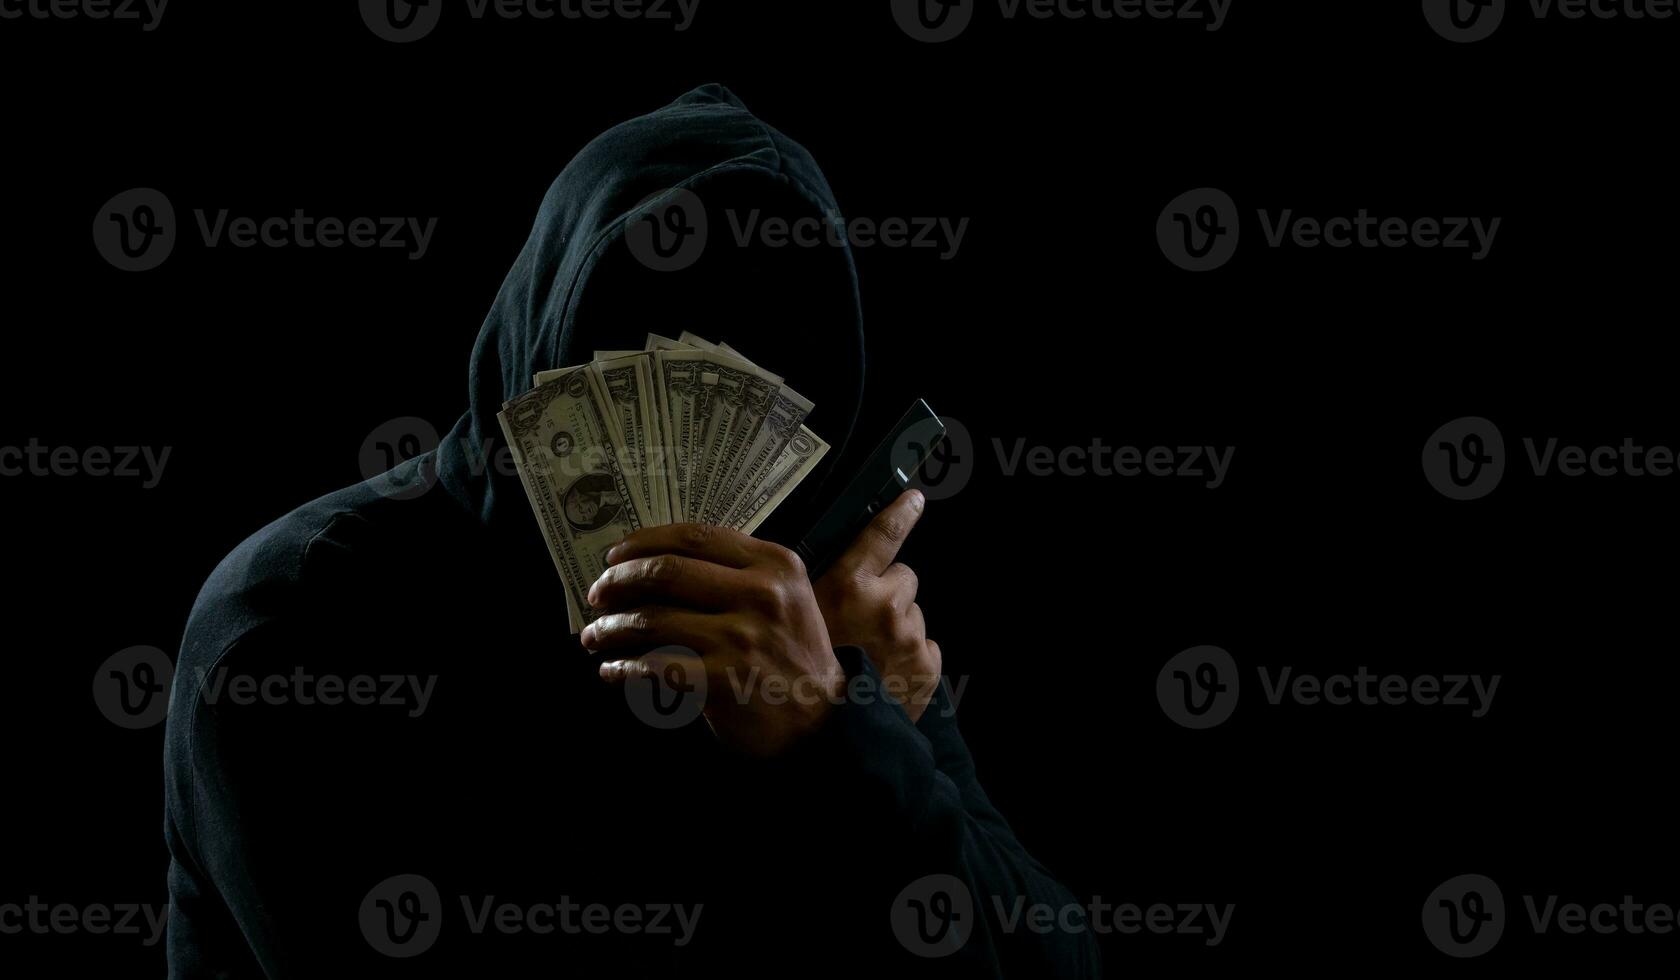 Portrait killer hacker mafia gangster spy man oneperson in black hoodie standing look hand holding money dollar obtained from robbery threat crime attack victim people night dark background copy space photo